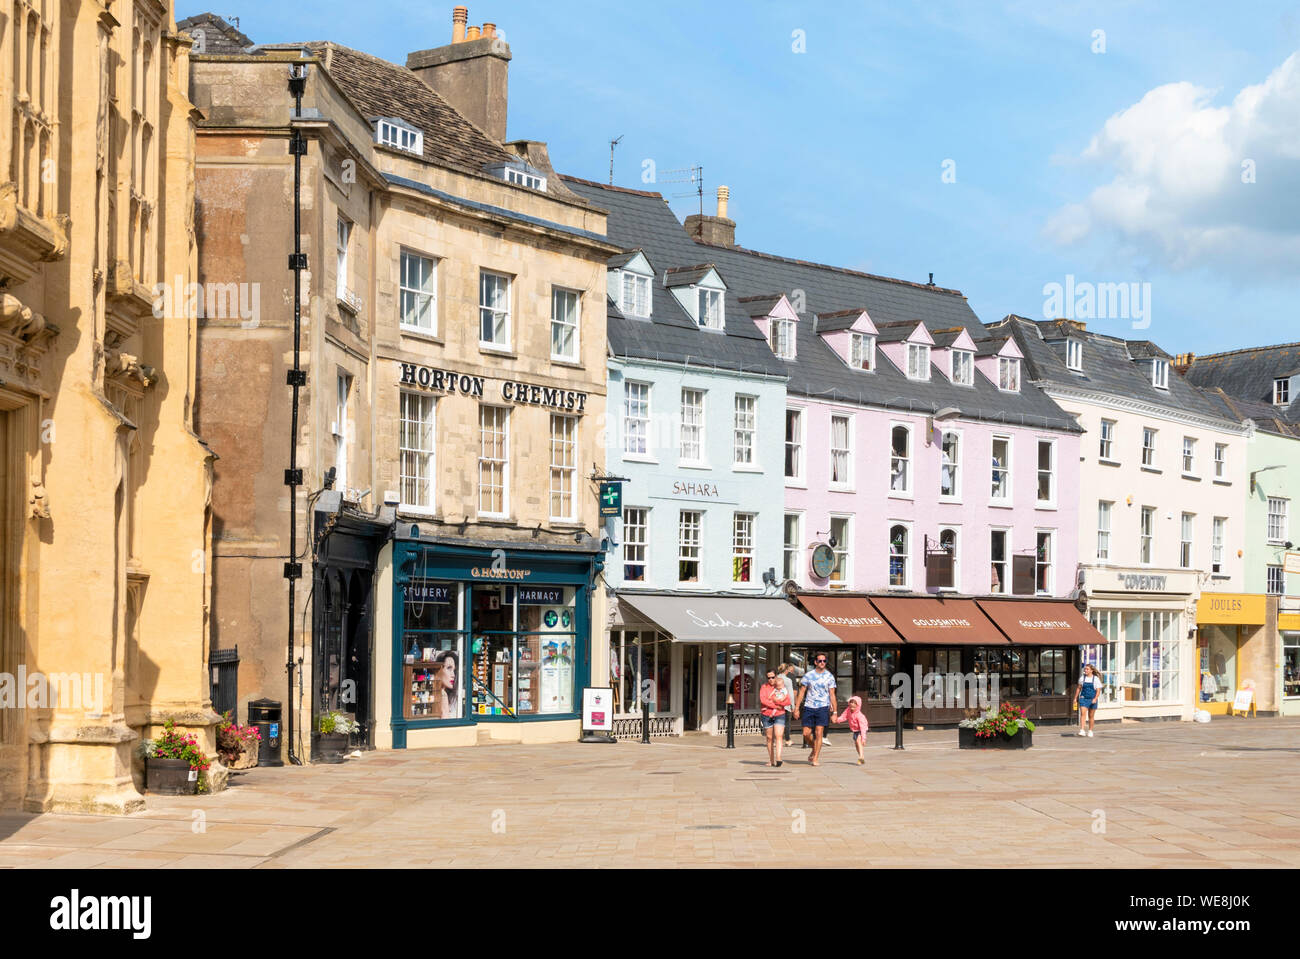 Shops and businesses on the Market place Cirencester town centre Cirencester Wiltshire england uk gb Europe Stock Photo